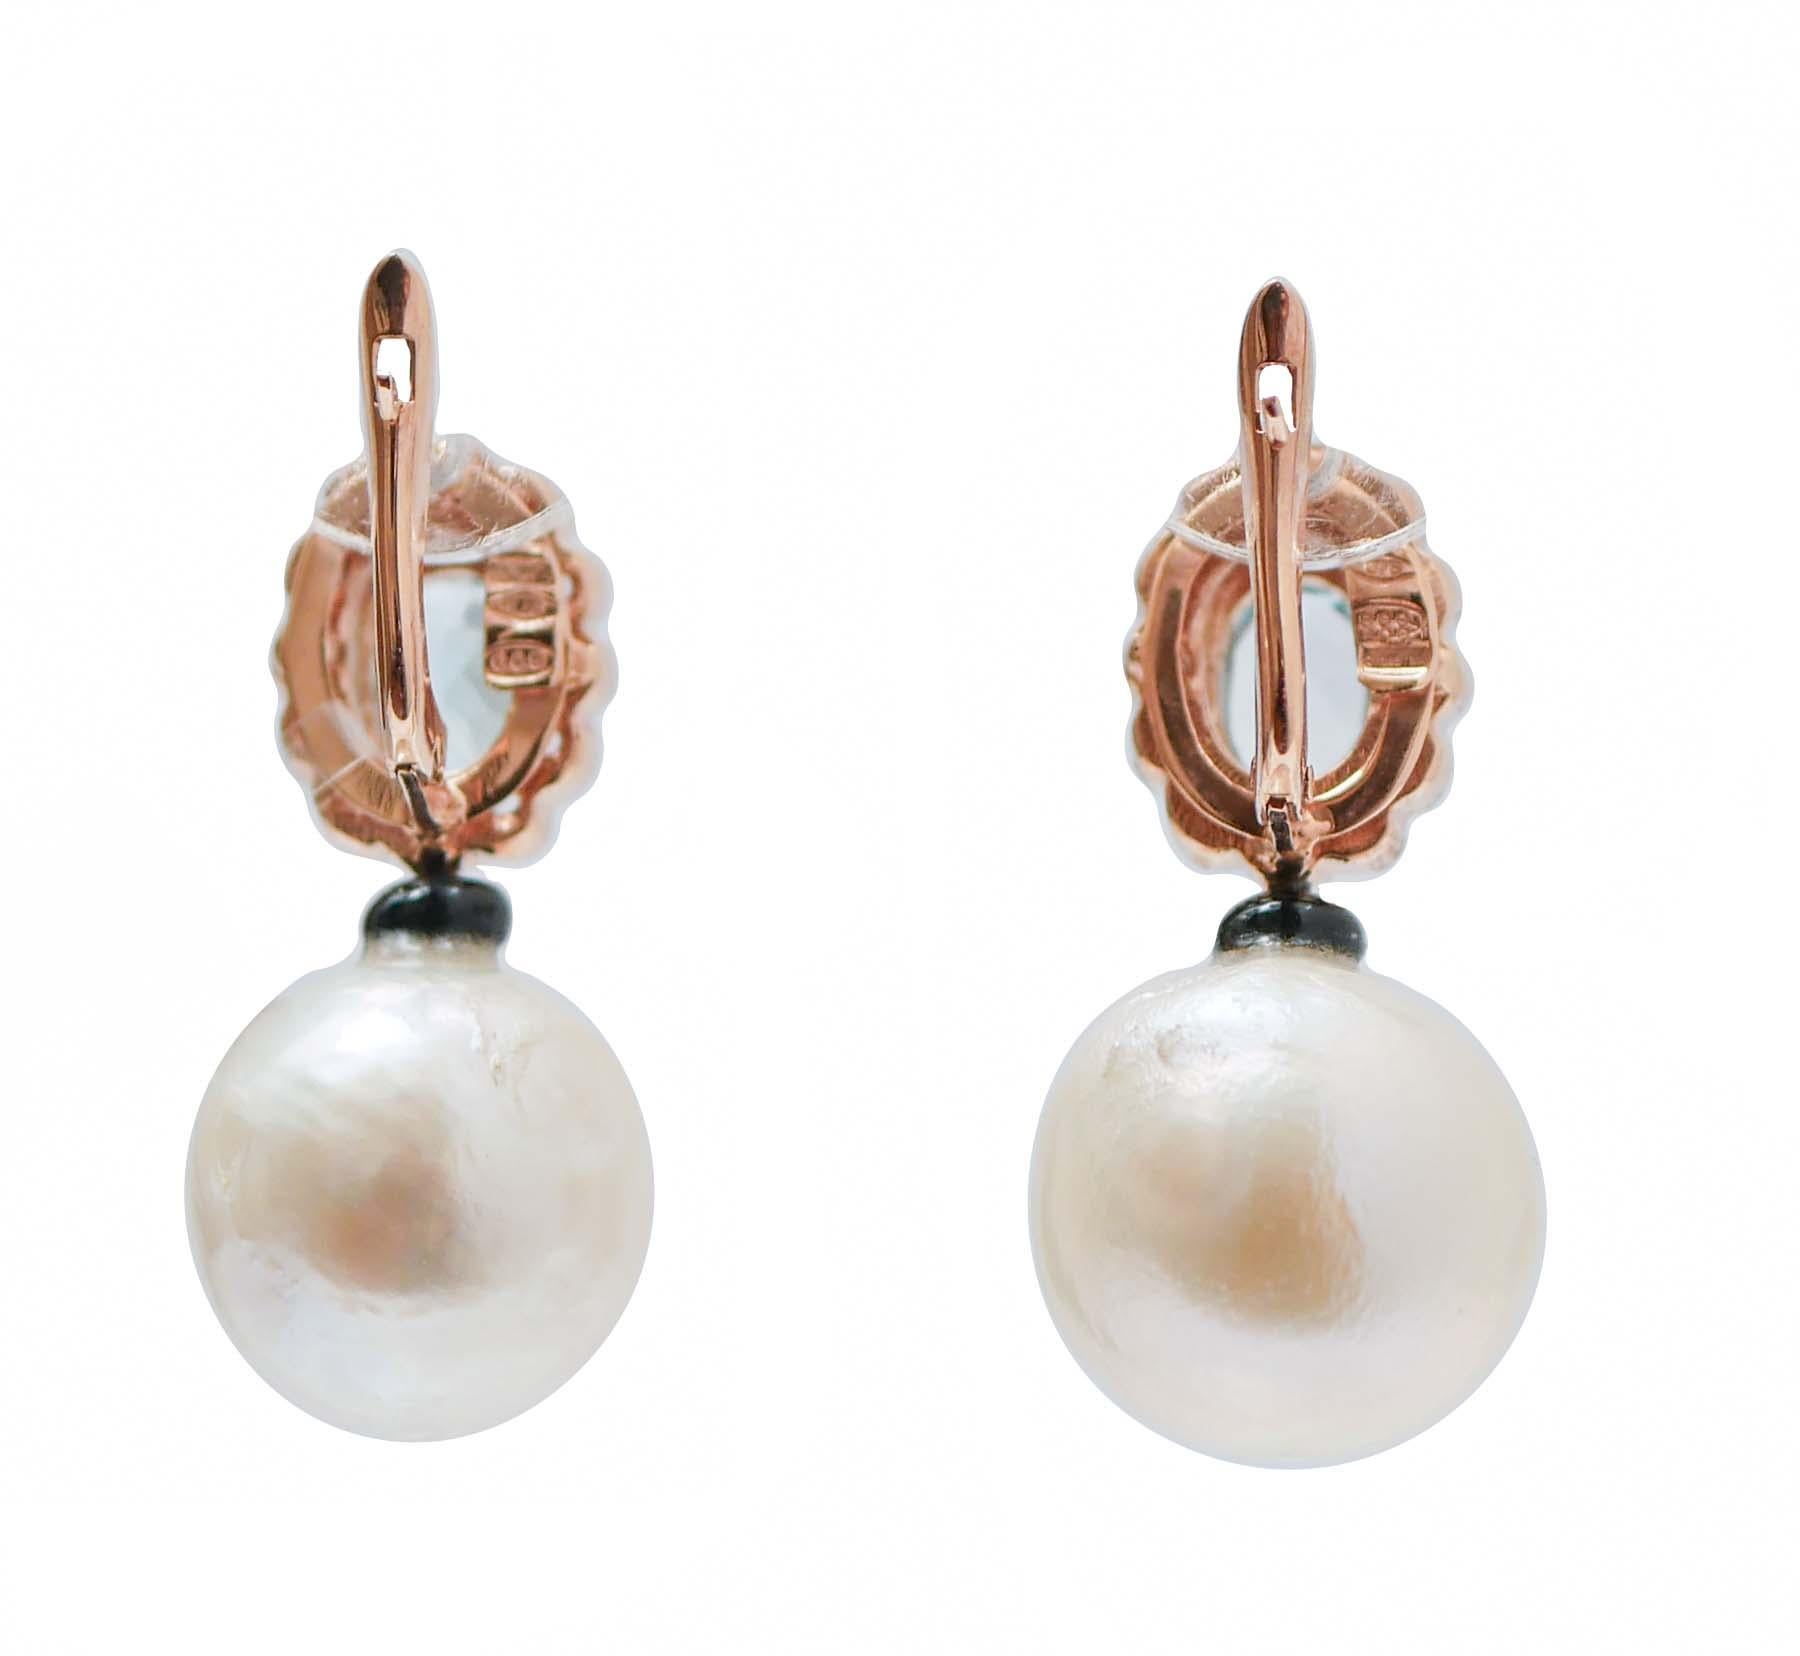 Retro Pearls, Aquamarine Colour Topazs, Diamonds, Onyx, Rose Gold and Silver Earrings. For Sale